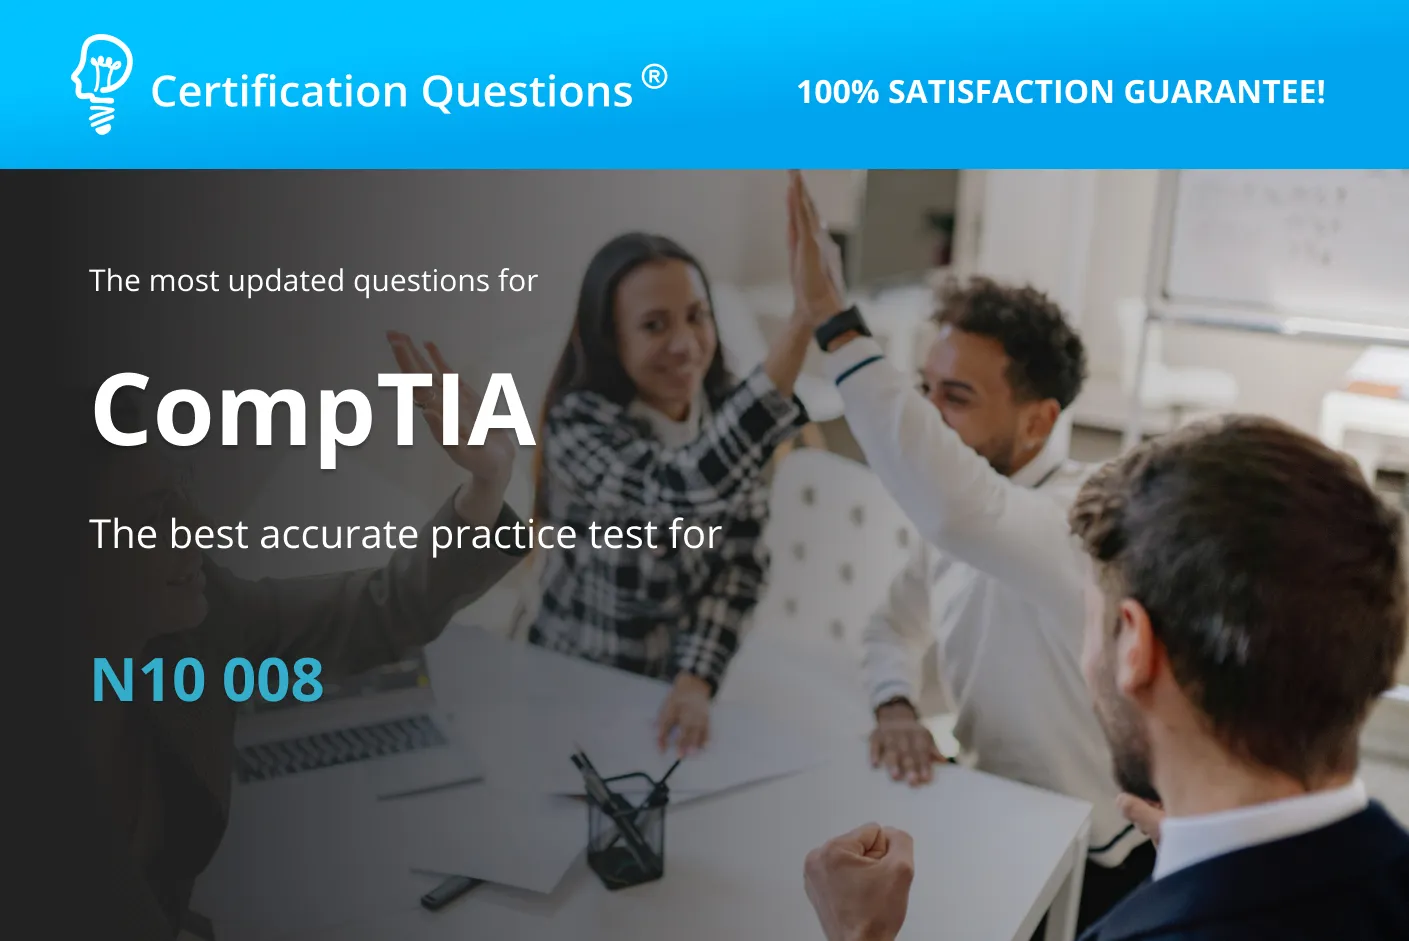 Here is the image for the study guide of the Comptia Network+ practice test n10-008